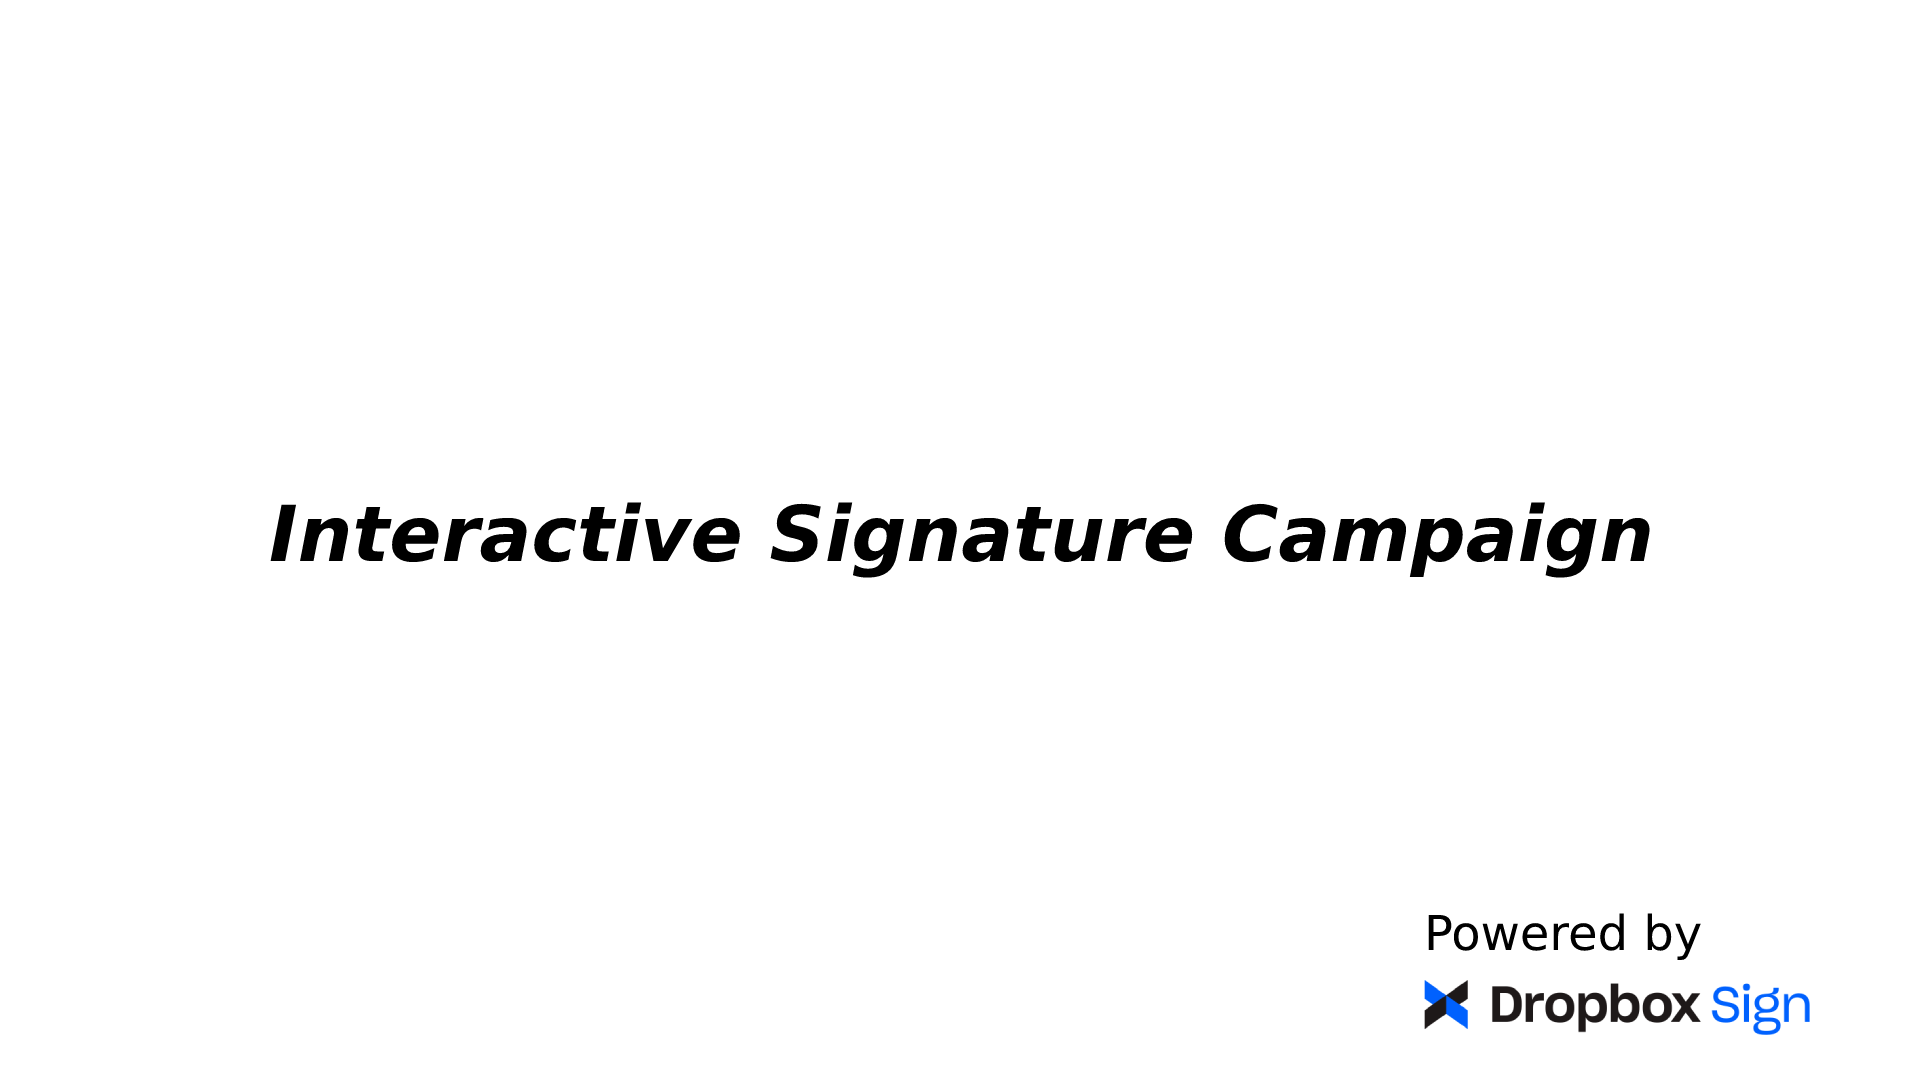 Interactive Signature Campaign powered by Dropbox Sign